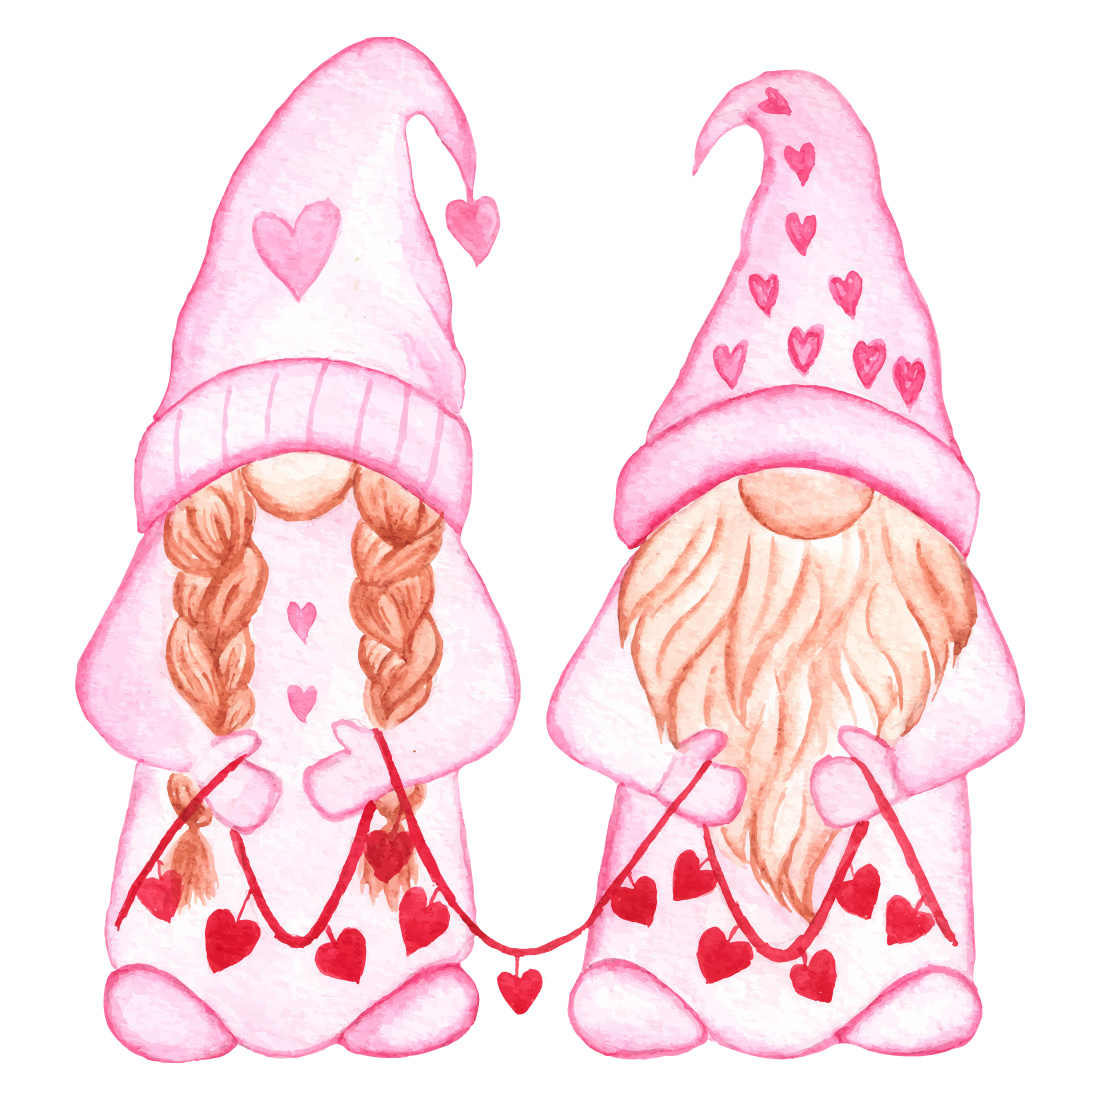 Gorgeous image of gnomes for Valentines Day